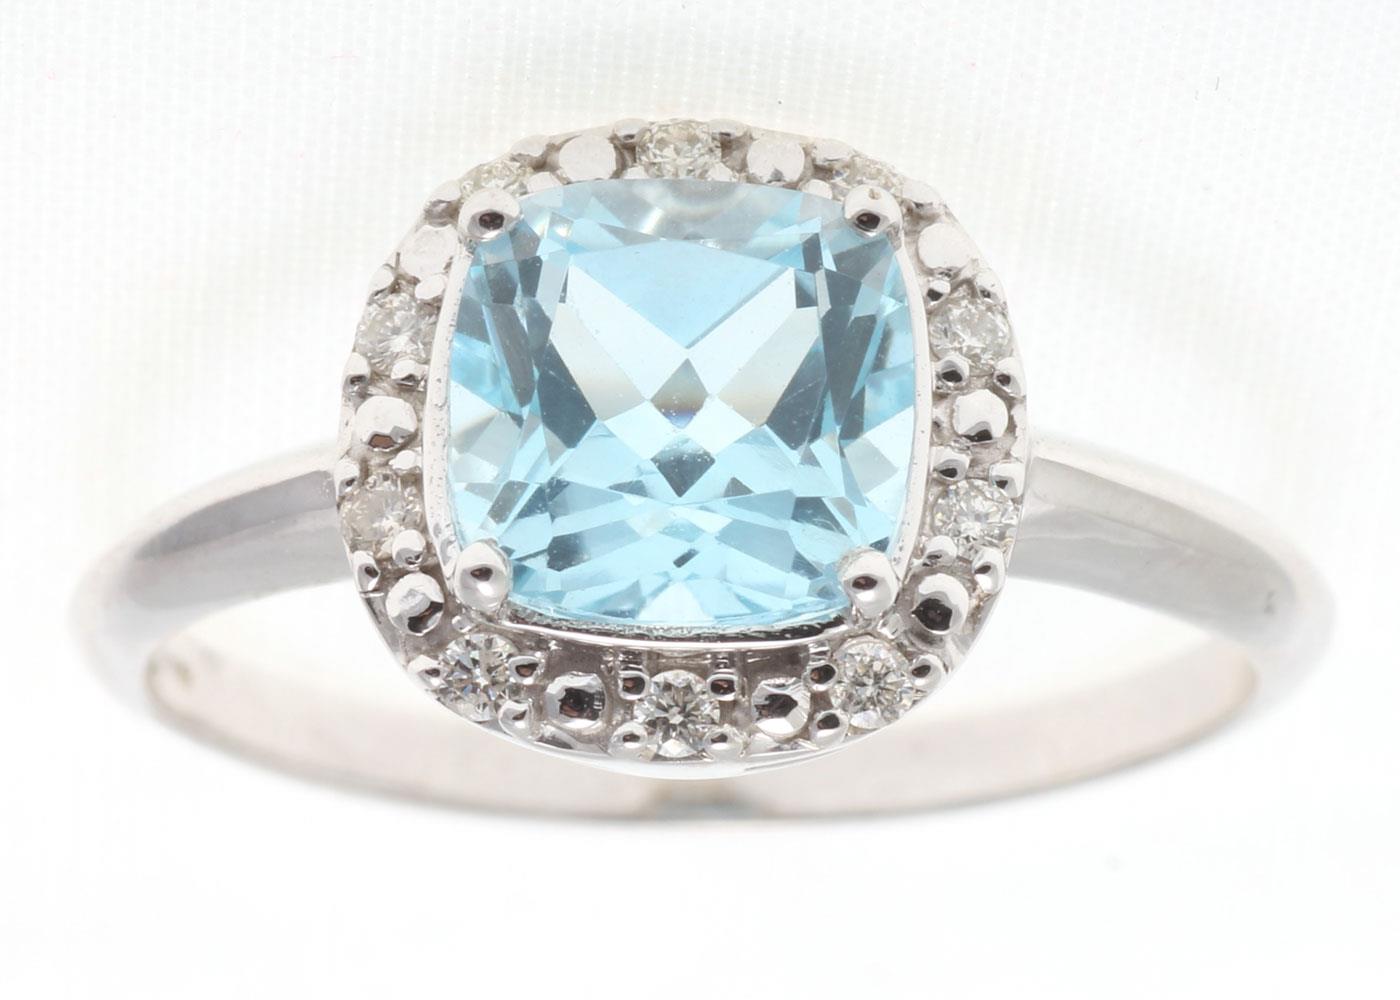 9ct White Gold Diamond And Blue Topaz Ring - Image 6 of 9